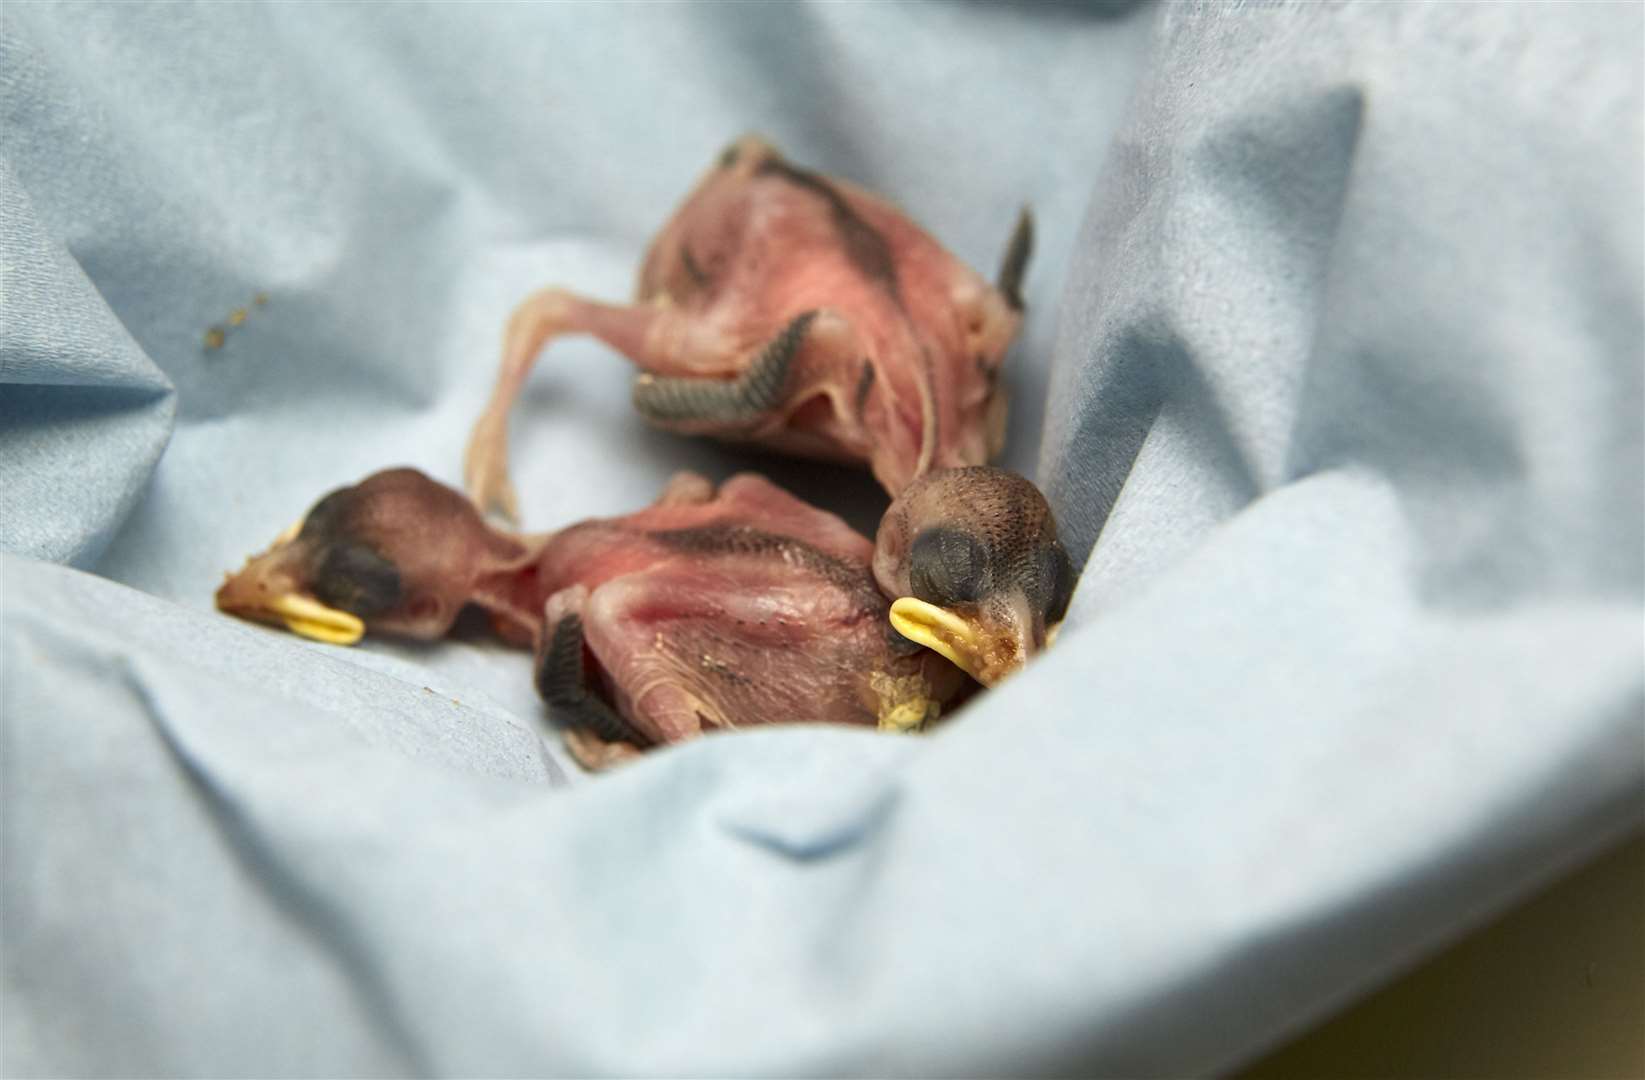 Nestlings have few or no feathers and are unlikely to survive outside their nest. Picture: RSPCA.